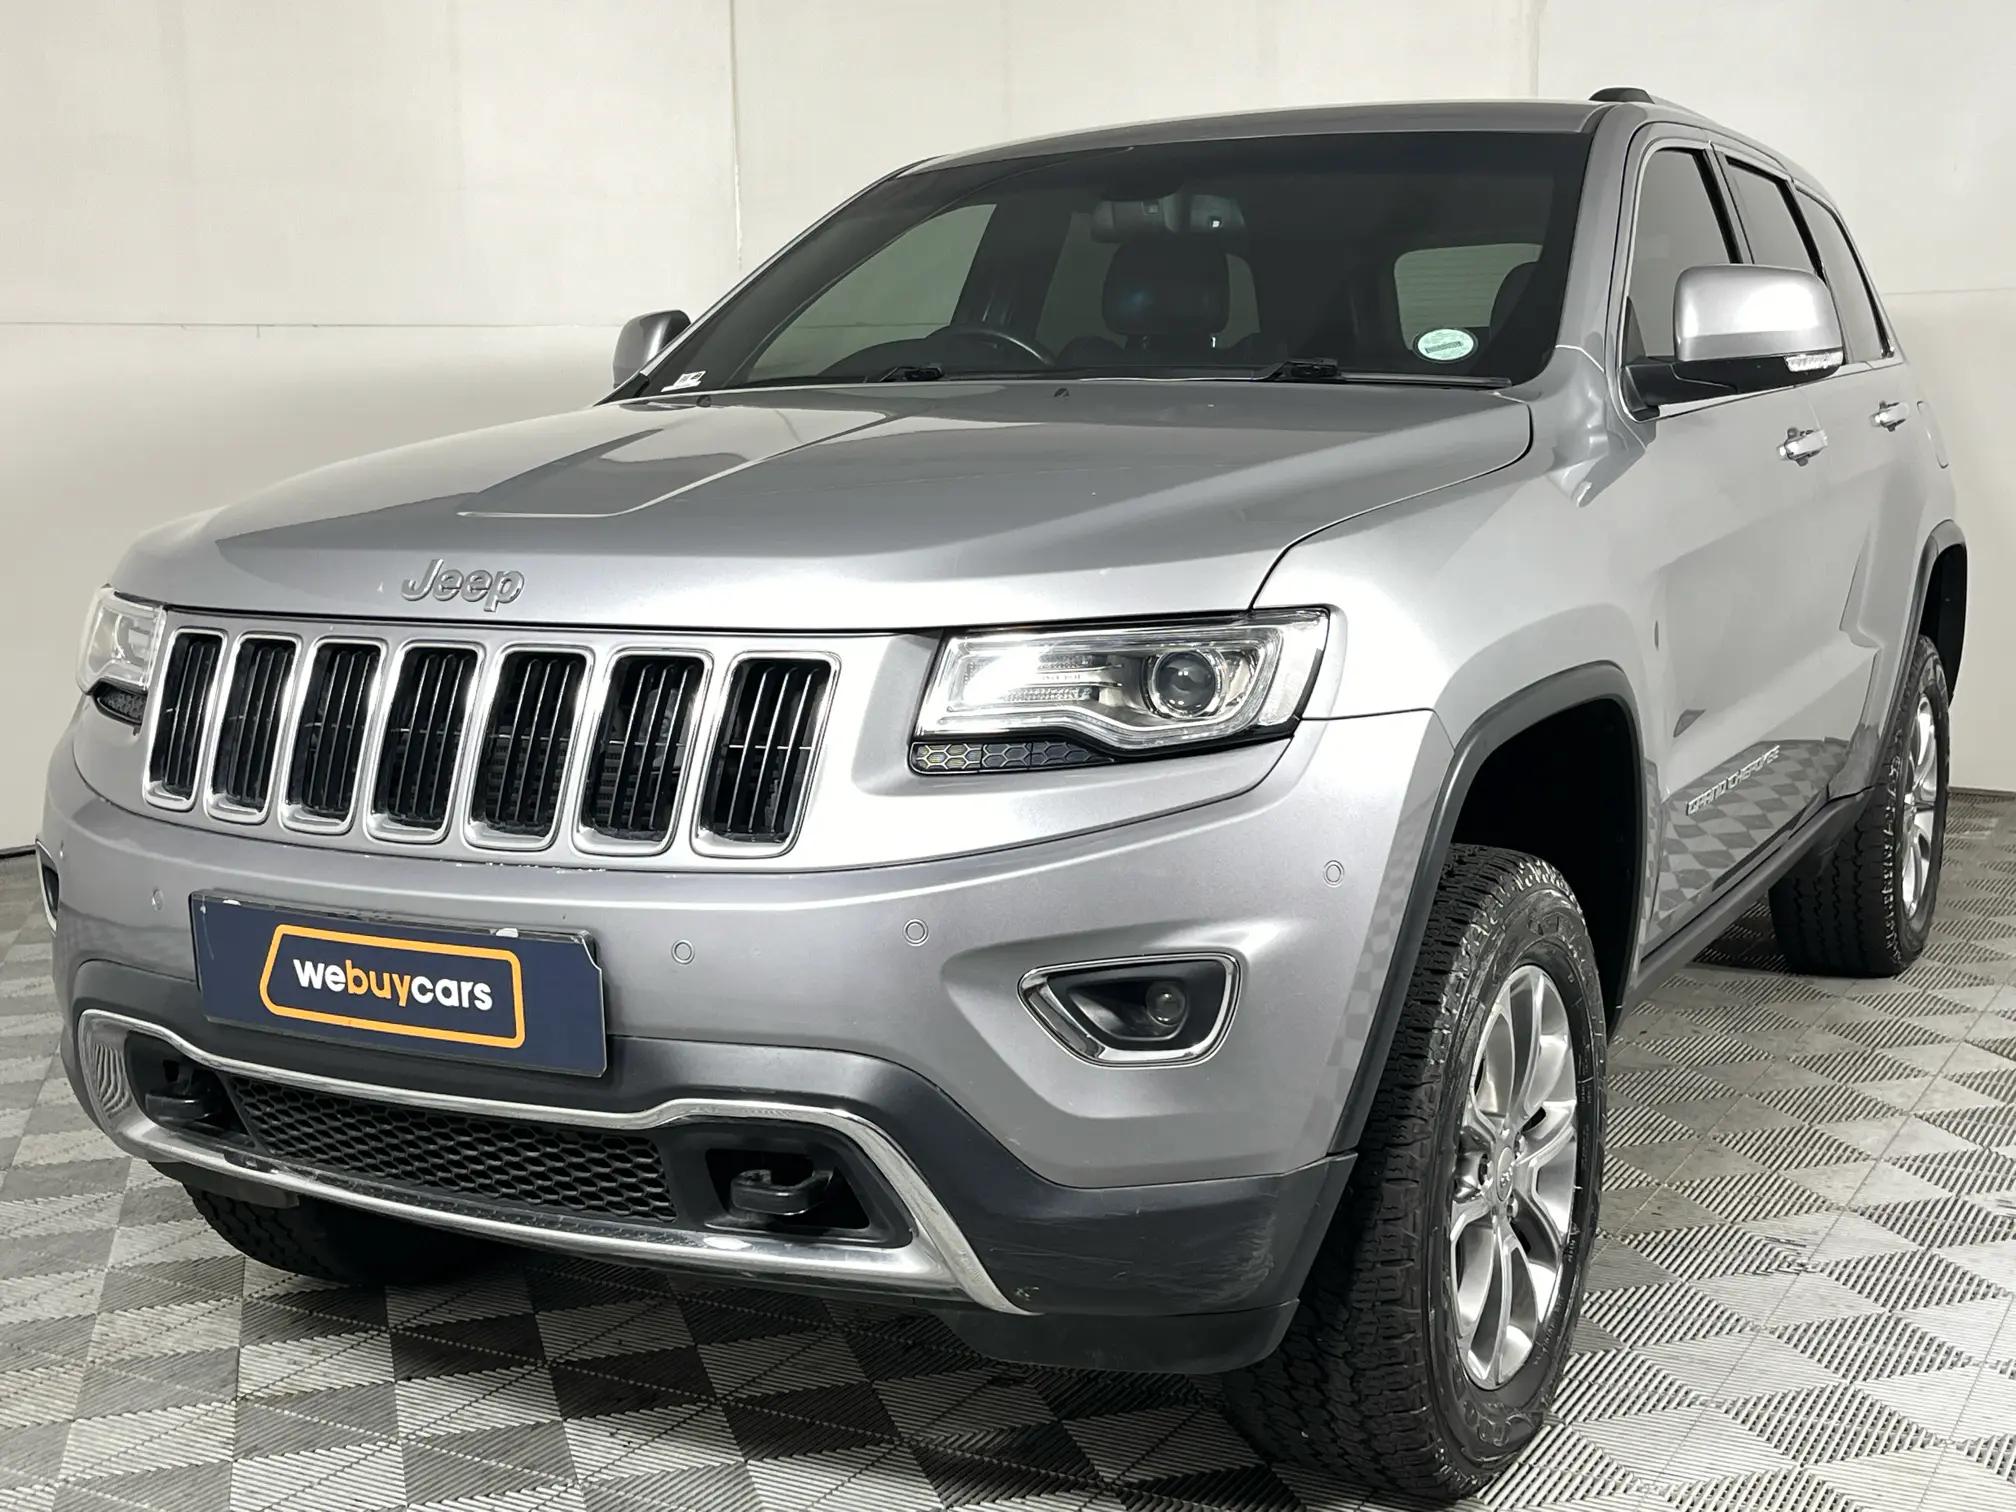 Jeep Grand Cherokee 3.0 (179 kW) CRD Limited